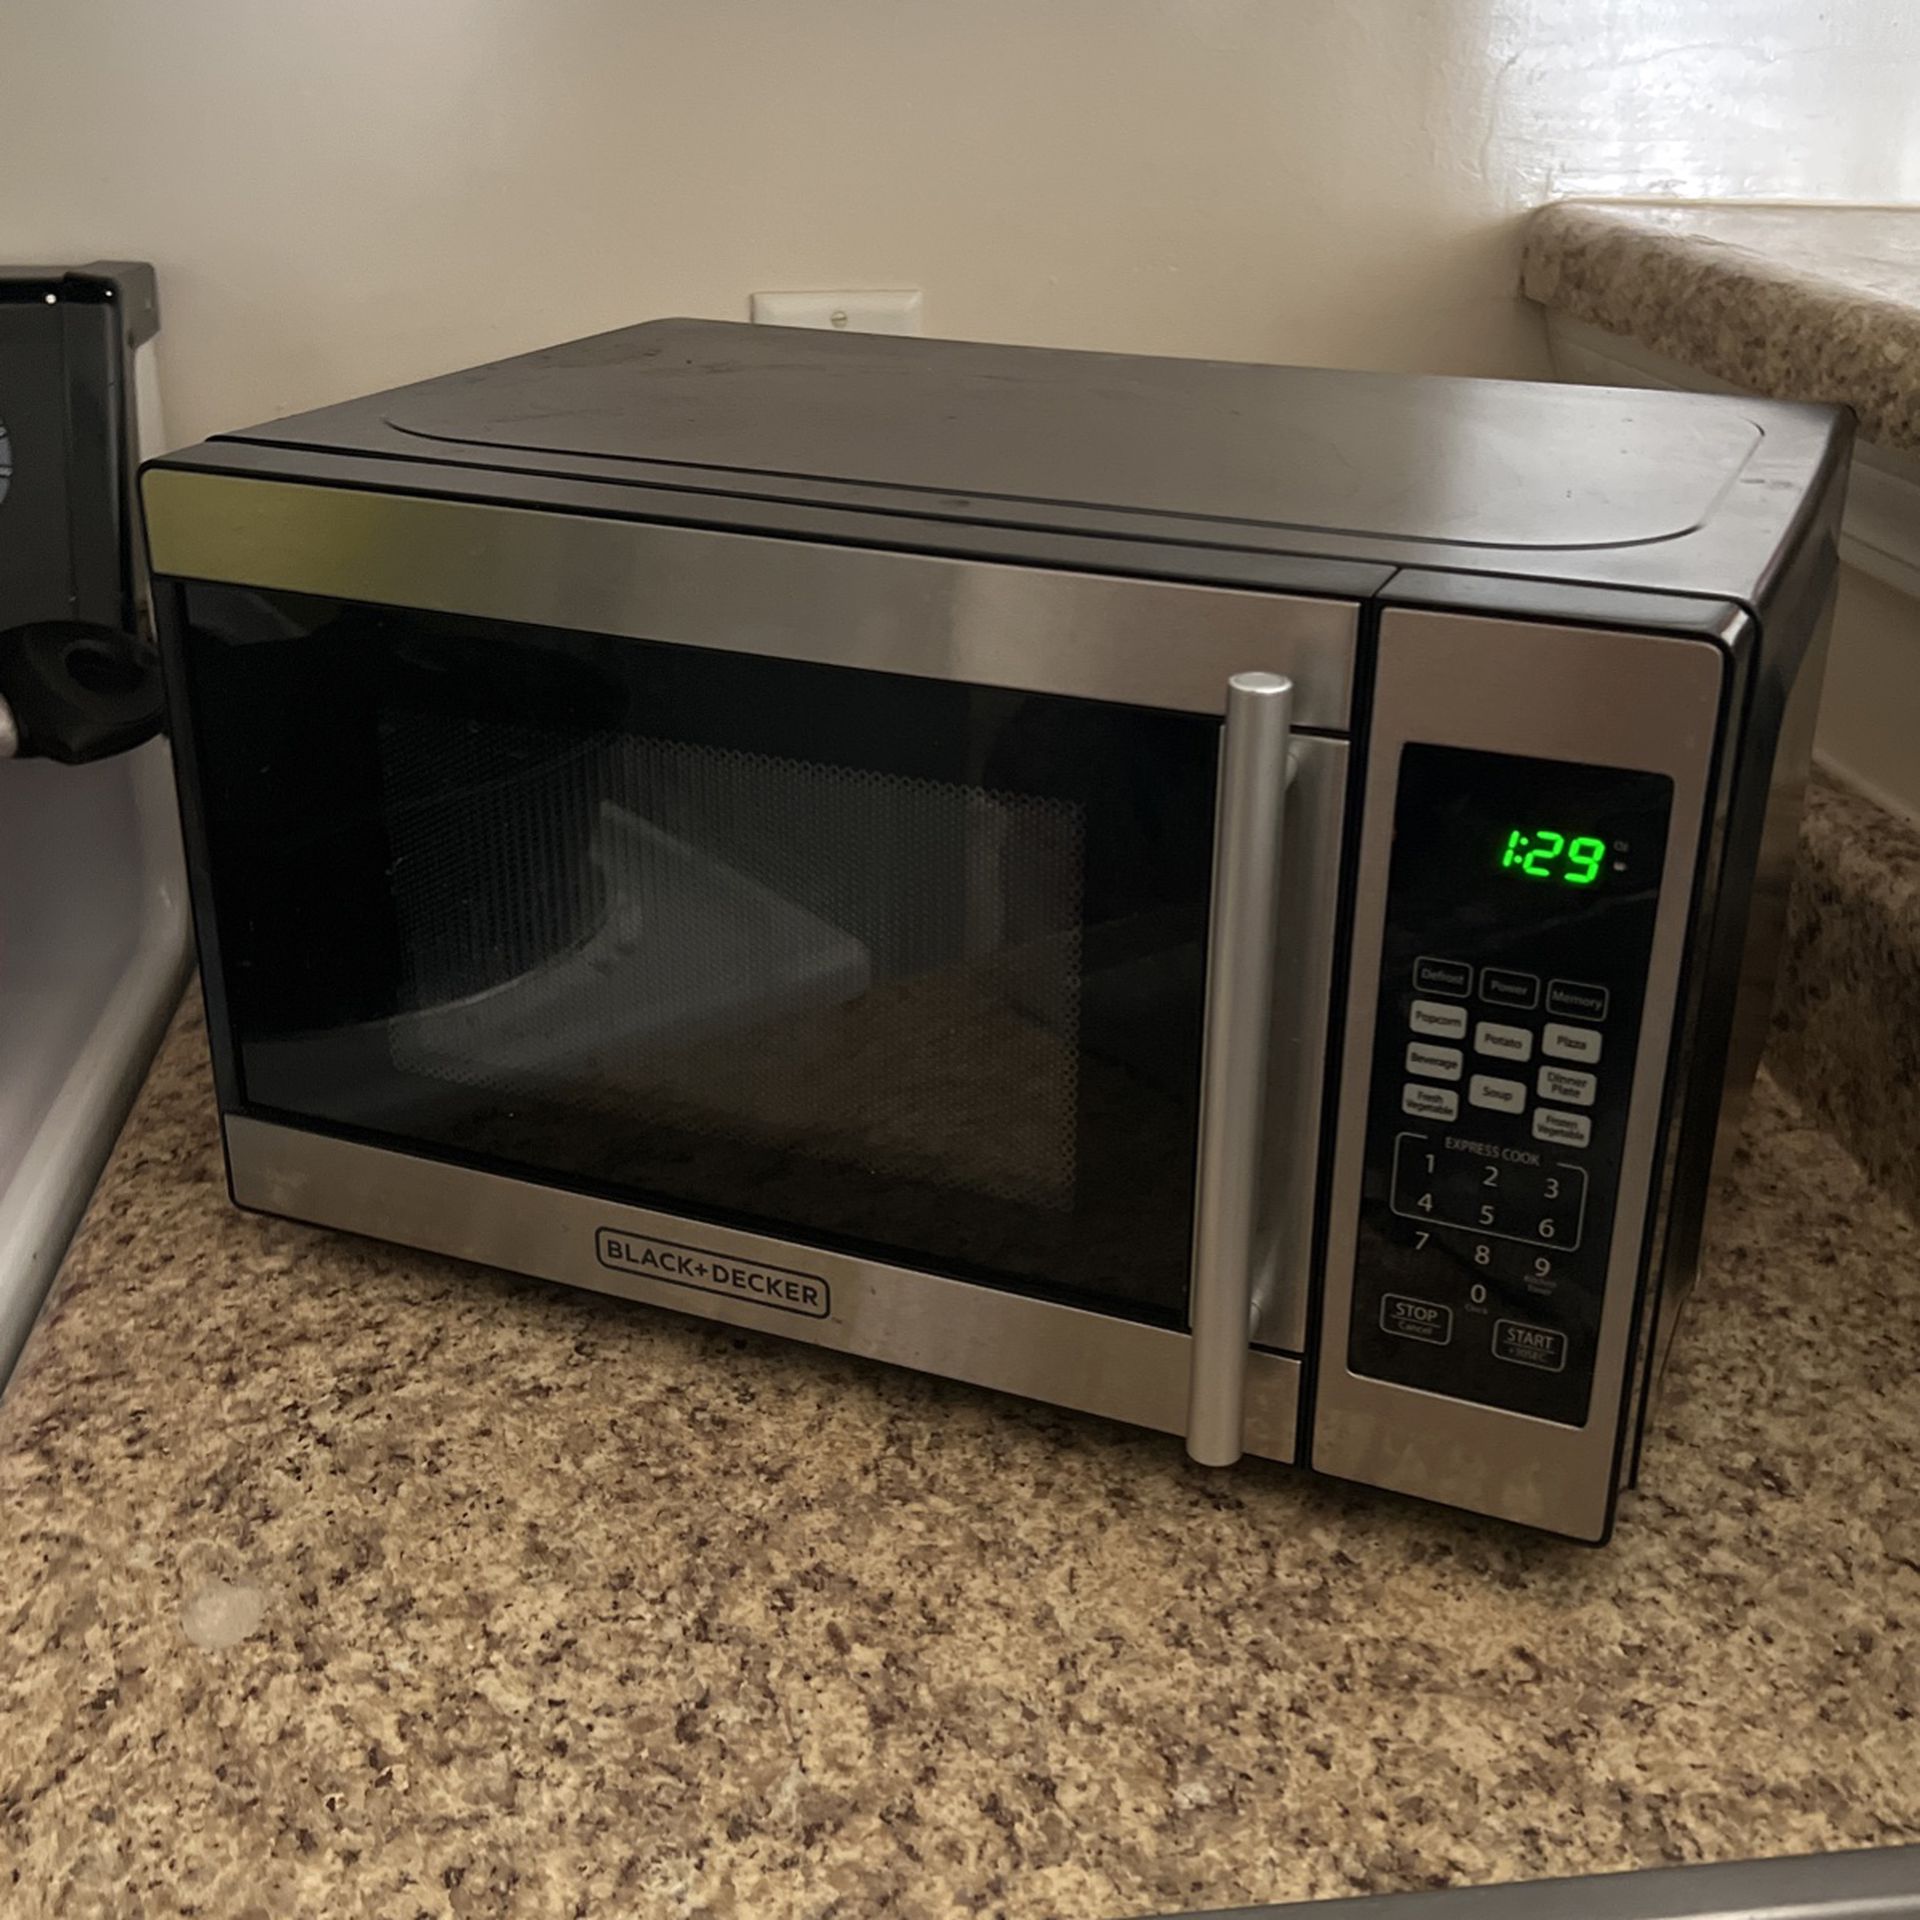 TOSHIBA Countertop Microwave Oven for Sale in Matthews, NC - OfferUp